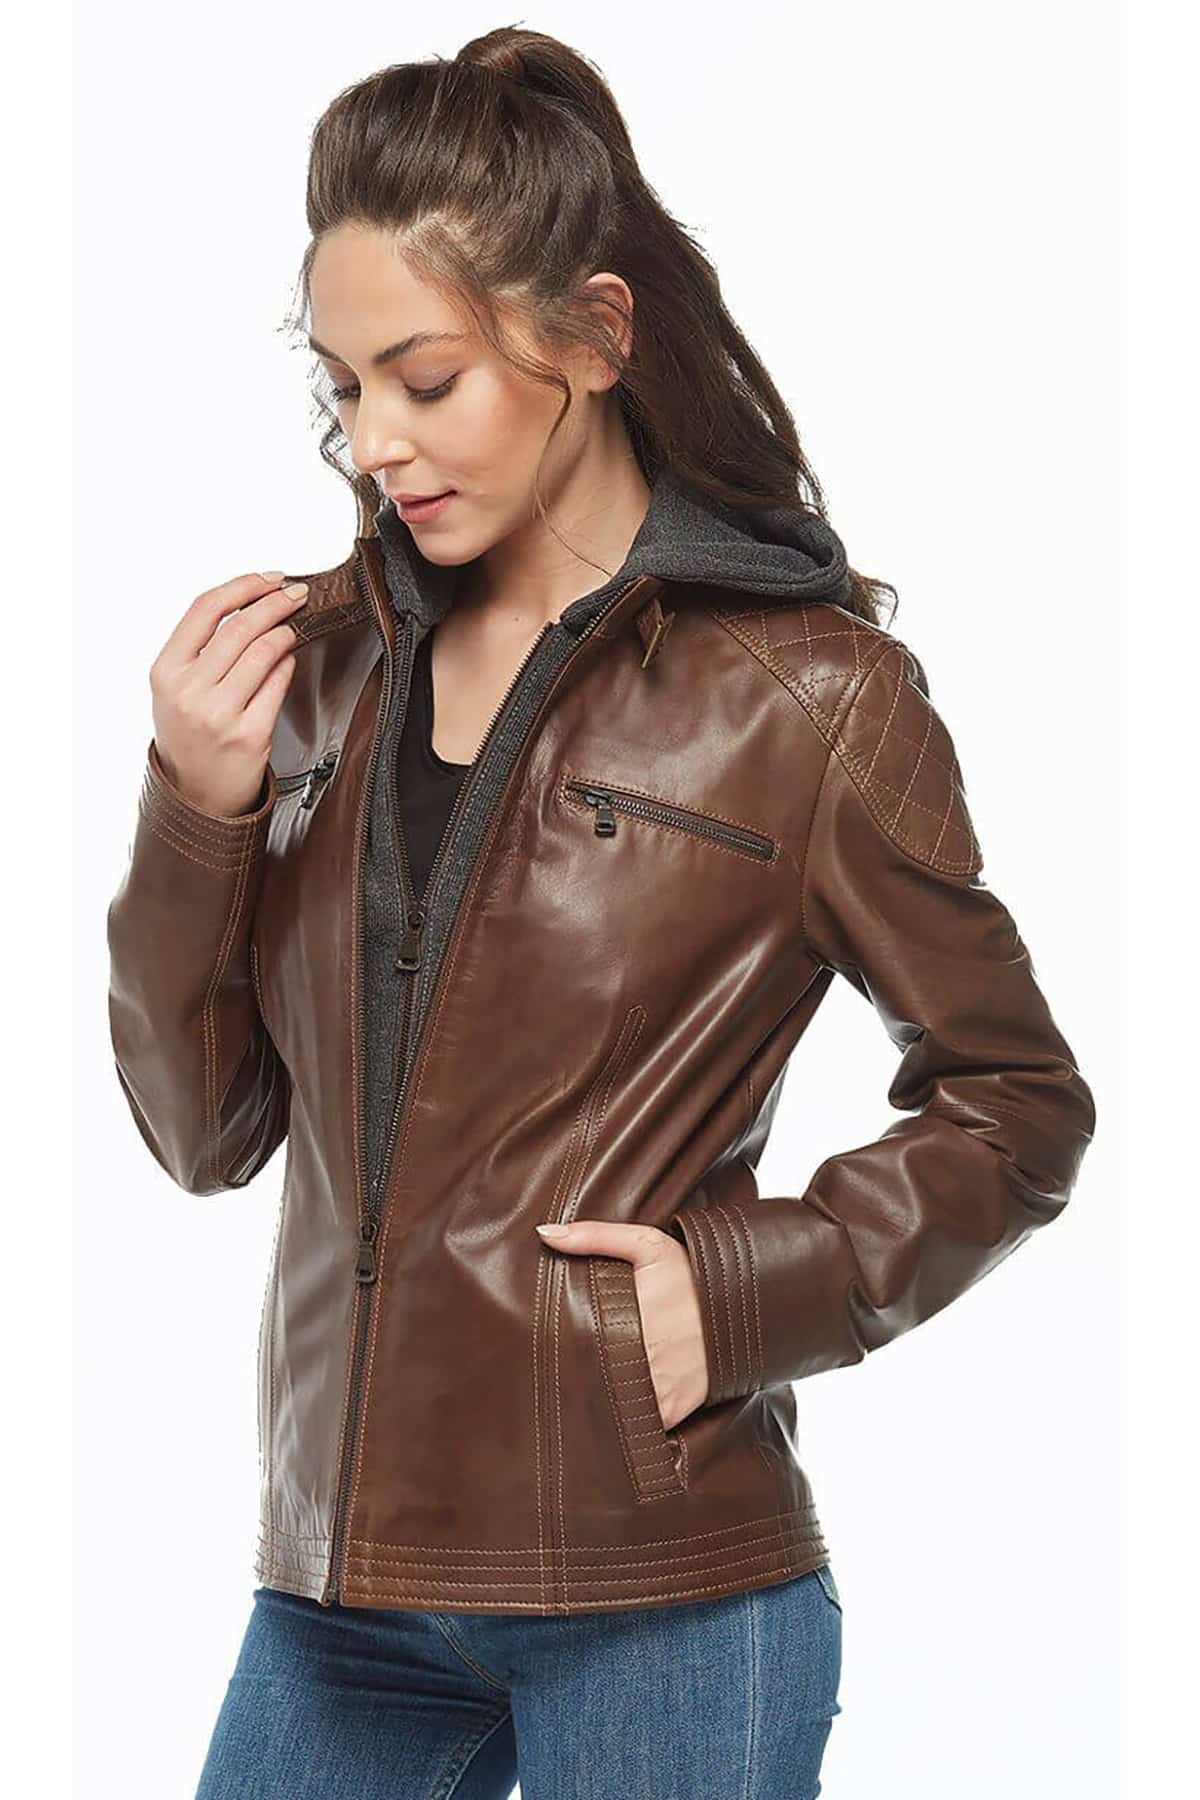 Mauritius Hooded Leather Jacket - Women's Coats/Jackets in Black | Buckle